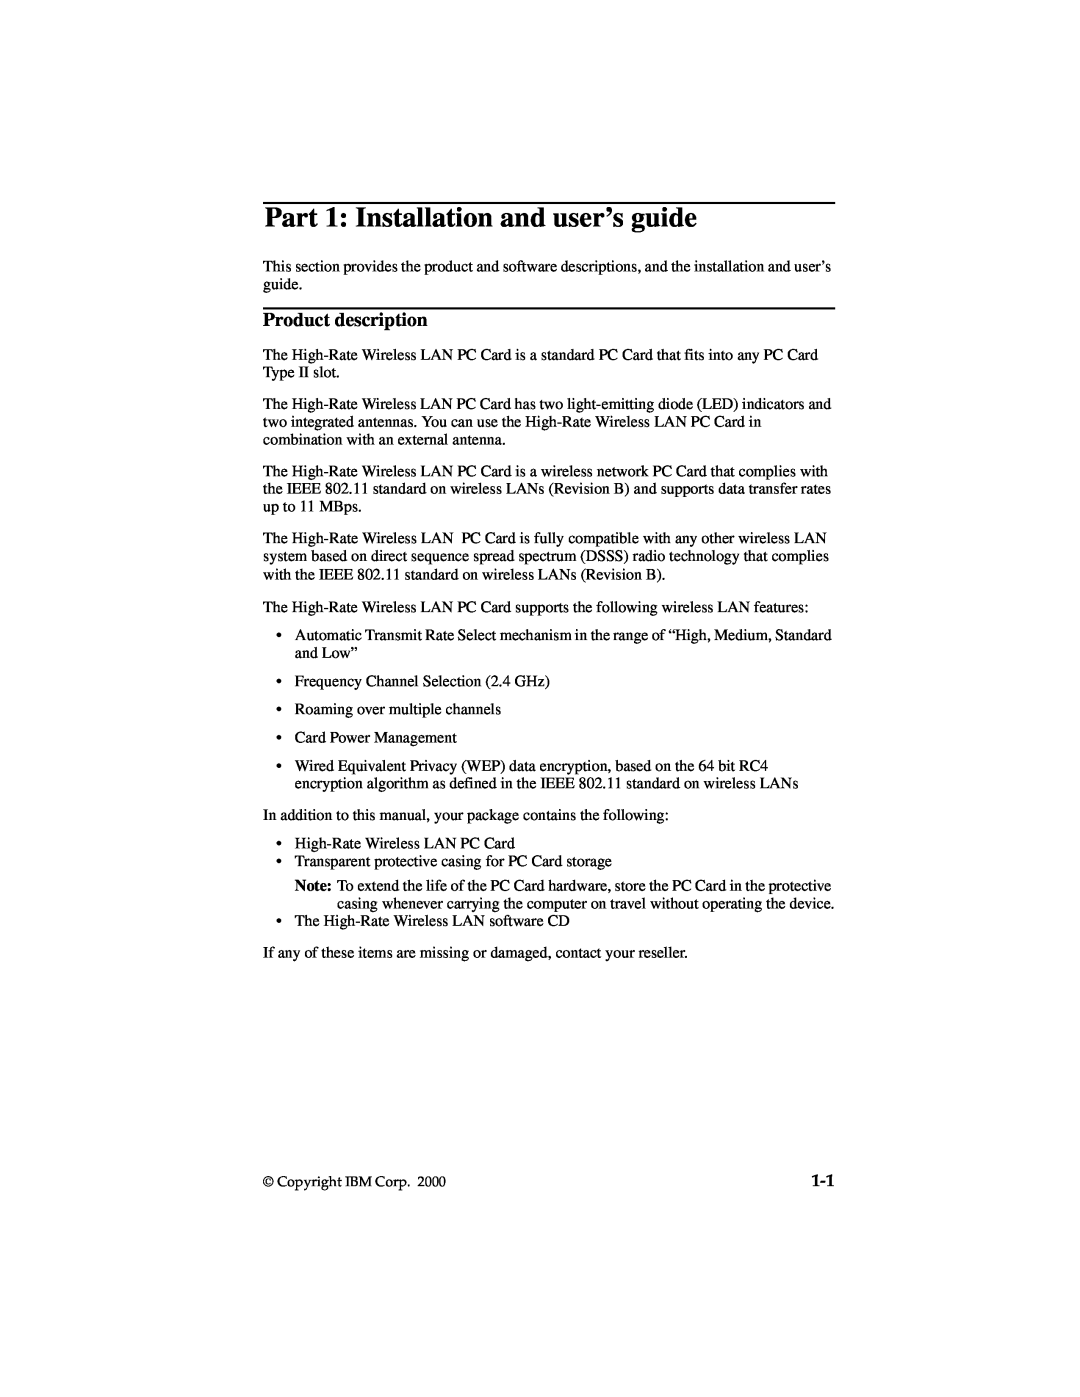 IBM 19K4543 manual Part 1 Installation and user’s guide, Product description 